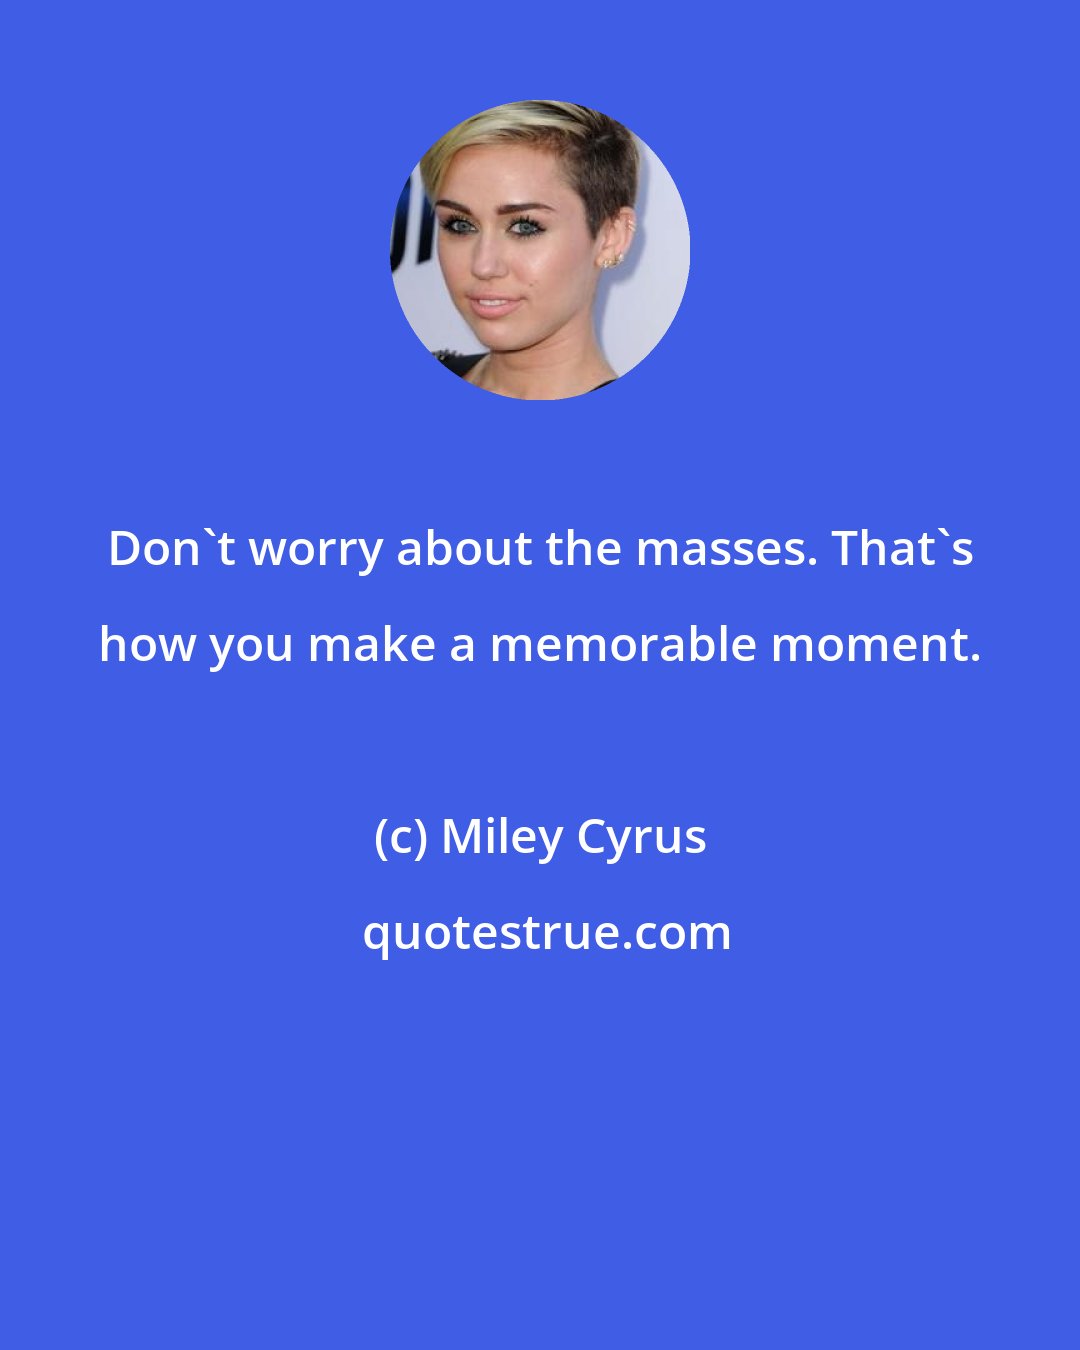 Miley Cyrus: Don't worry about the masses. That's how you make a memorable moment.